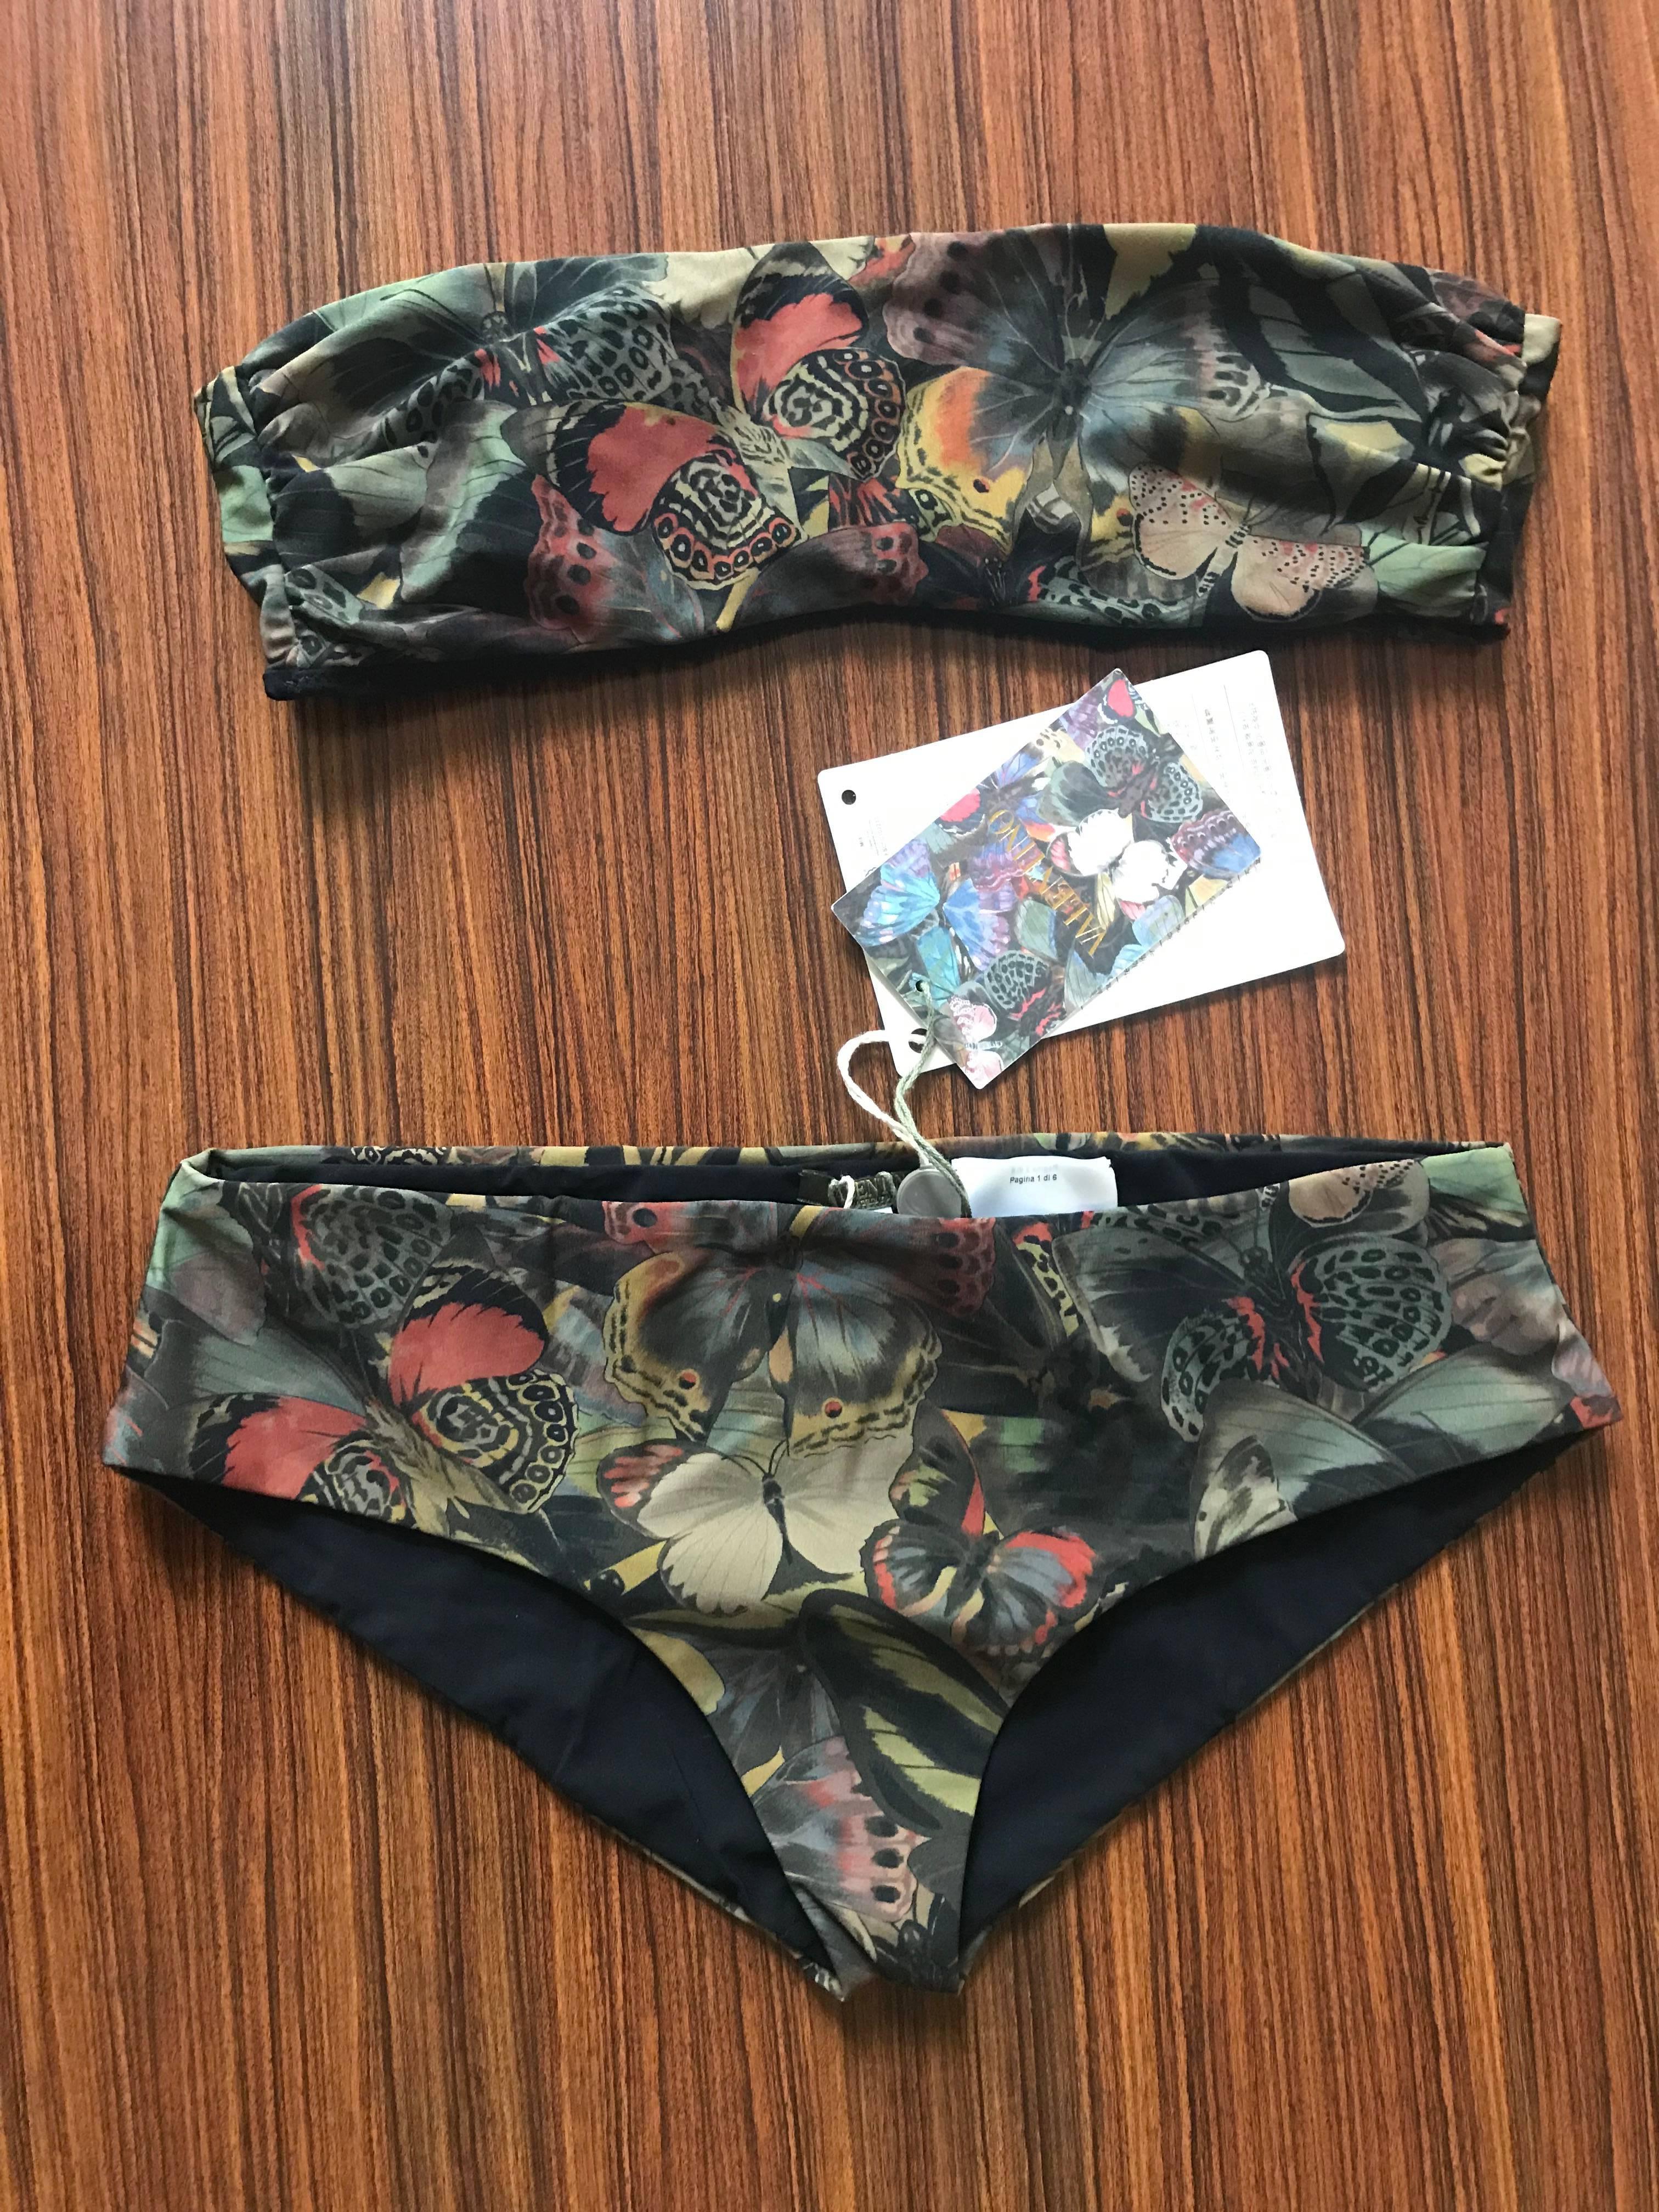 New with tags Valentino green and multicolor butterfly print bikini bathing suit with bandeau top. Butterfly print is from a collage created by artist Marlies Plank. Gold Valentino rock stud closure fastens at back of swim suit top.   

72%